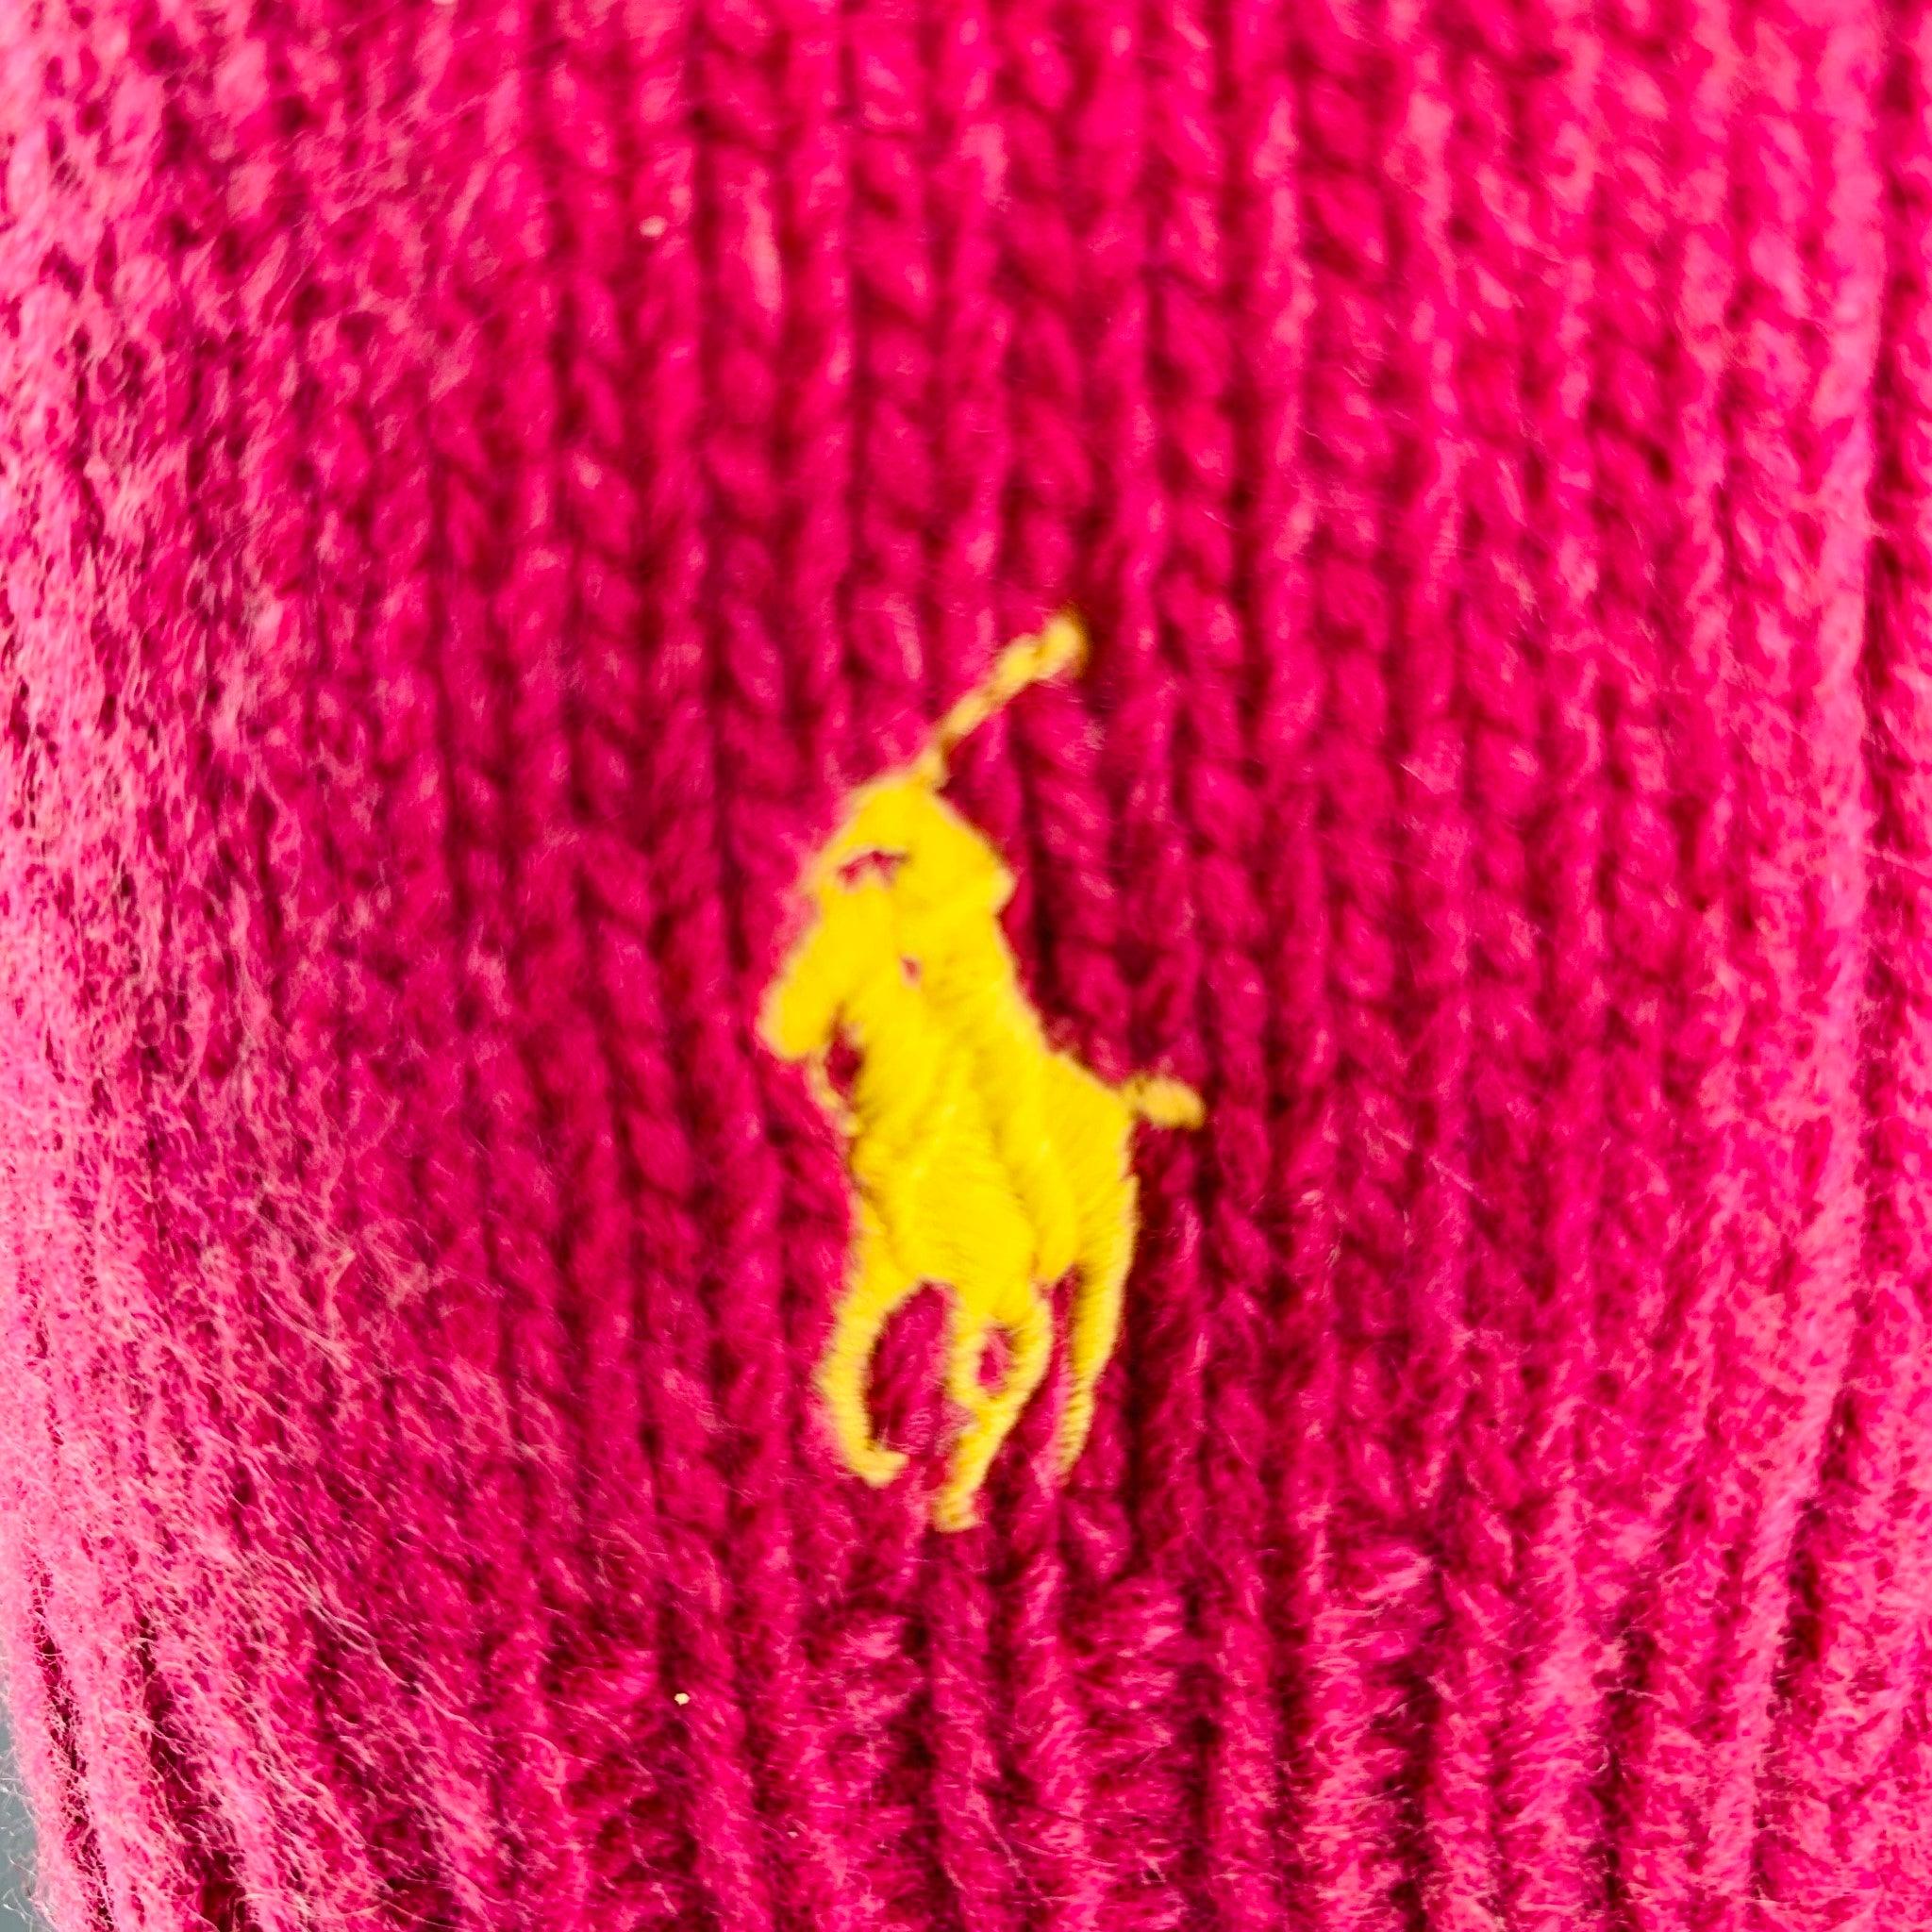 RALPH LAUREN scarf comes in a pink knitted cashmere and wool knitted featuring a Yellow Pony logo.Very Good Pre-Owned Condition. 

Measurements: 
  86 inches  x 8.5 inches 
 
  
  
 
Reference No.: 128310
Category: Scarves & Shawls
More Details
   